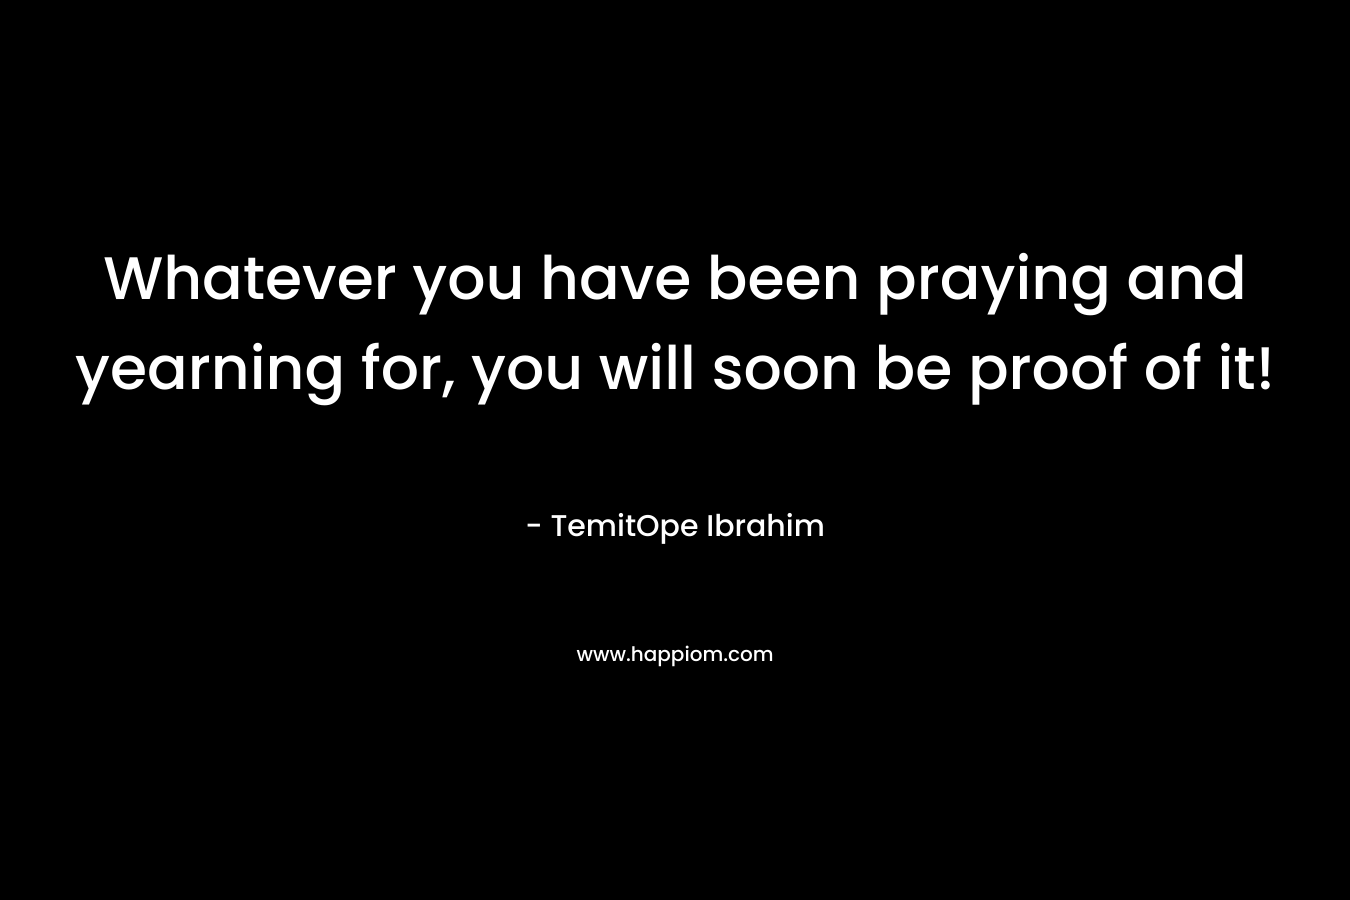 Whatever you have been praying and yearning for, you will soon be proof of it!